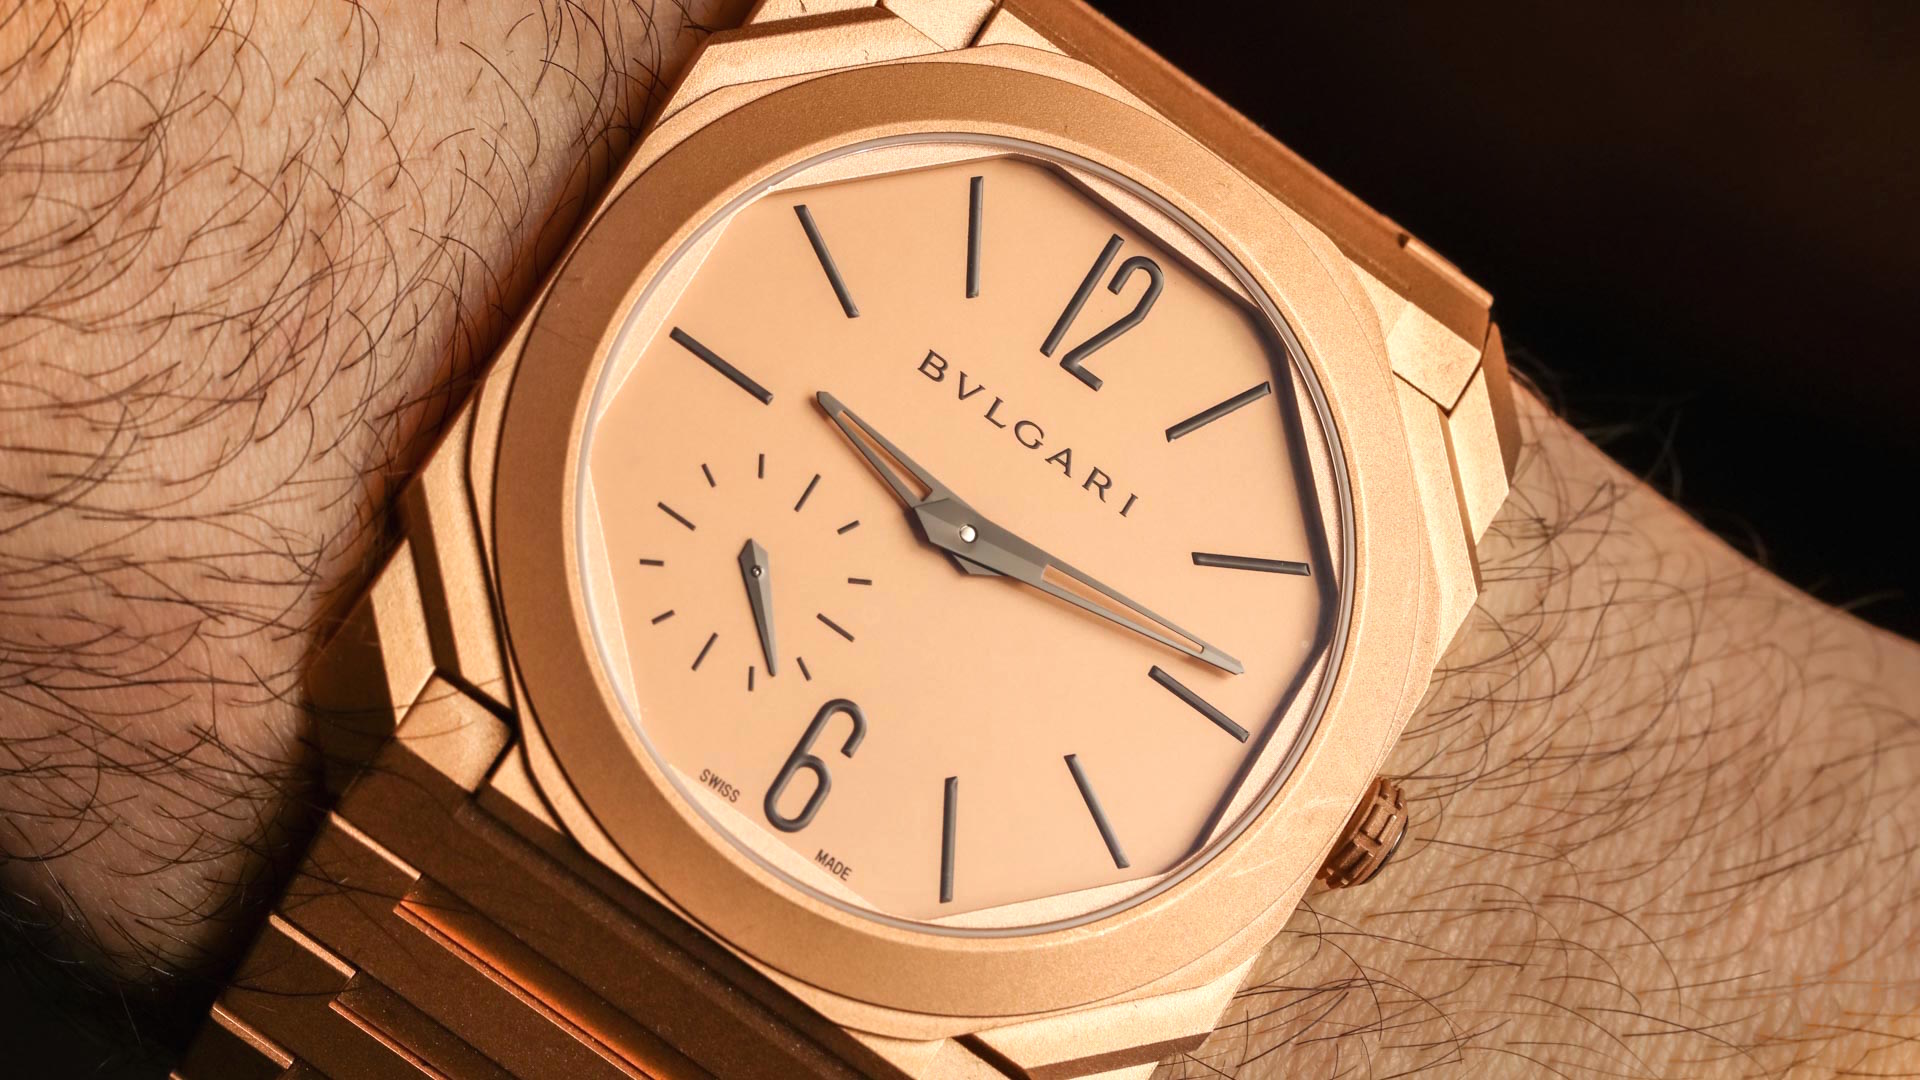 Bulgari Octo Finissimo Automatic Gold Watch Hands-On